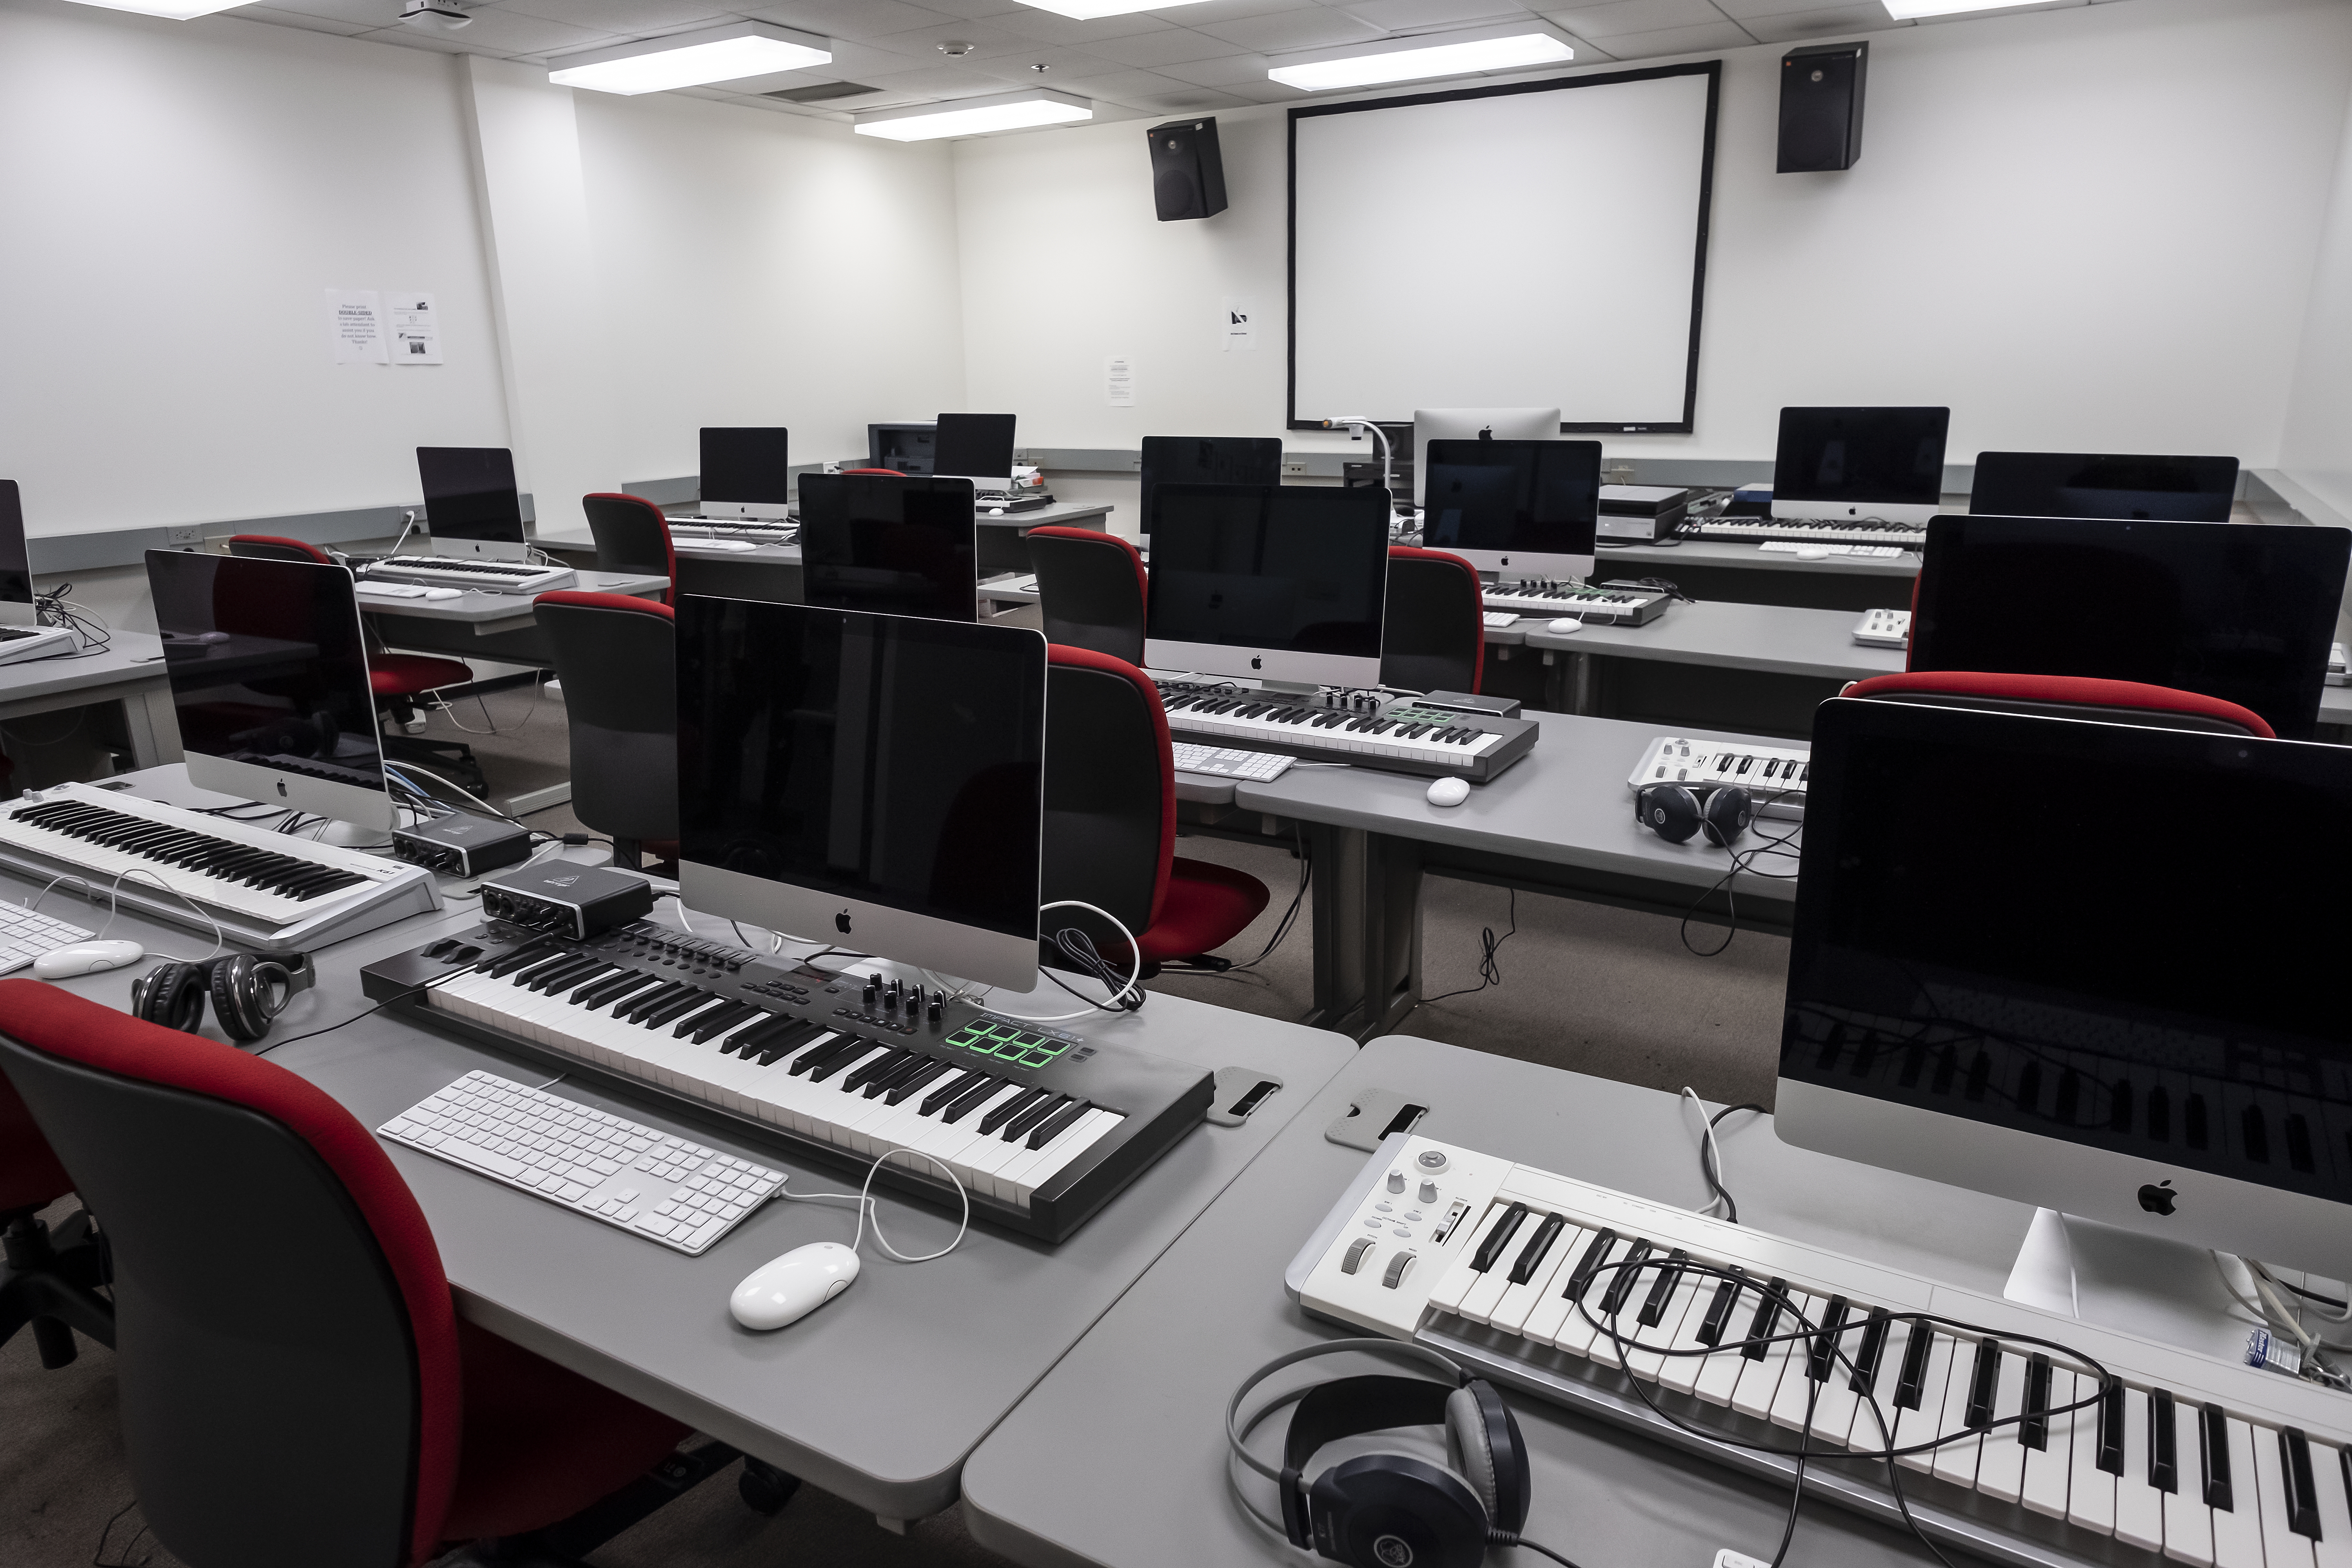 Music Scanning – Technology in Music Education